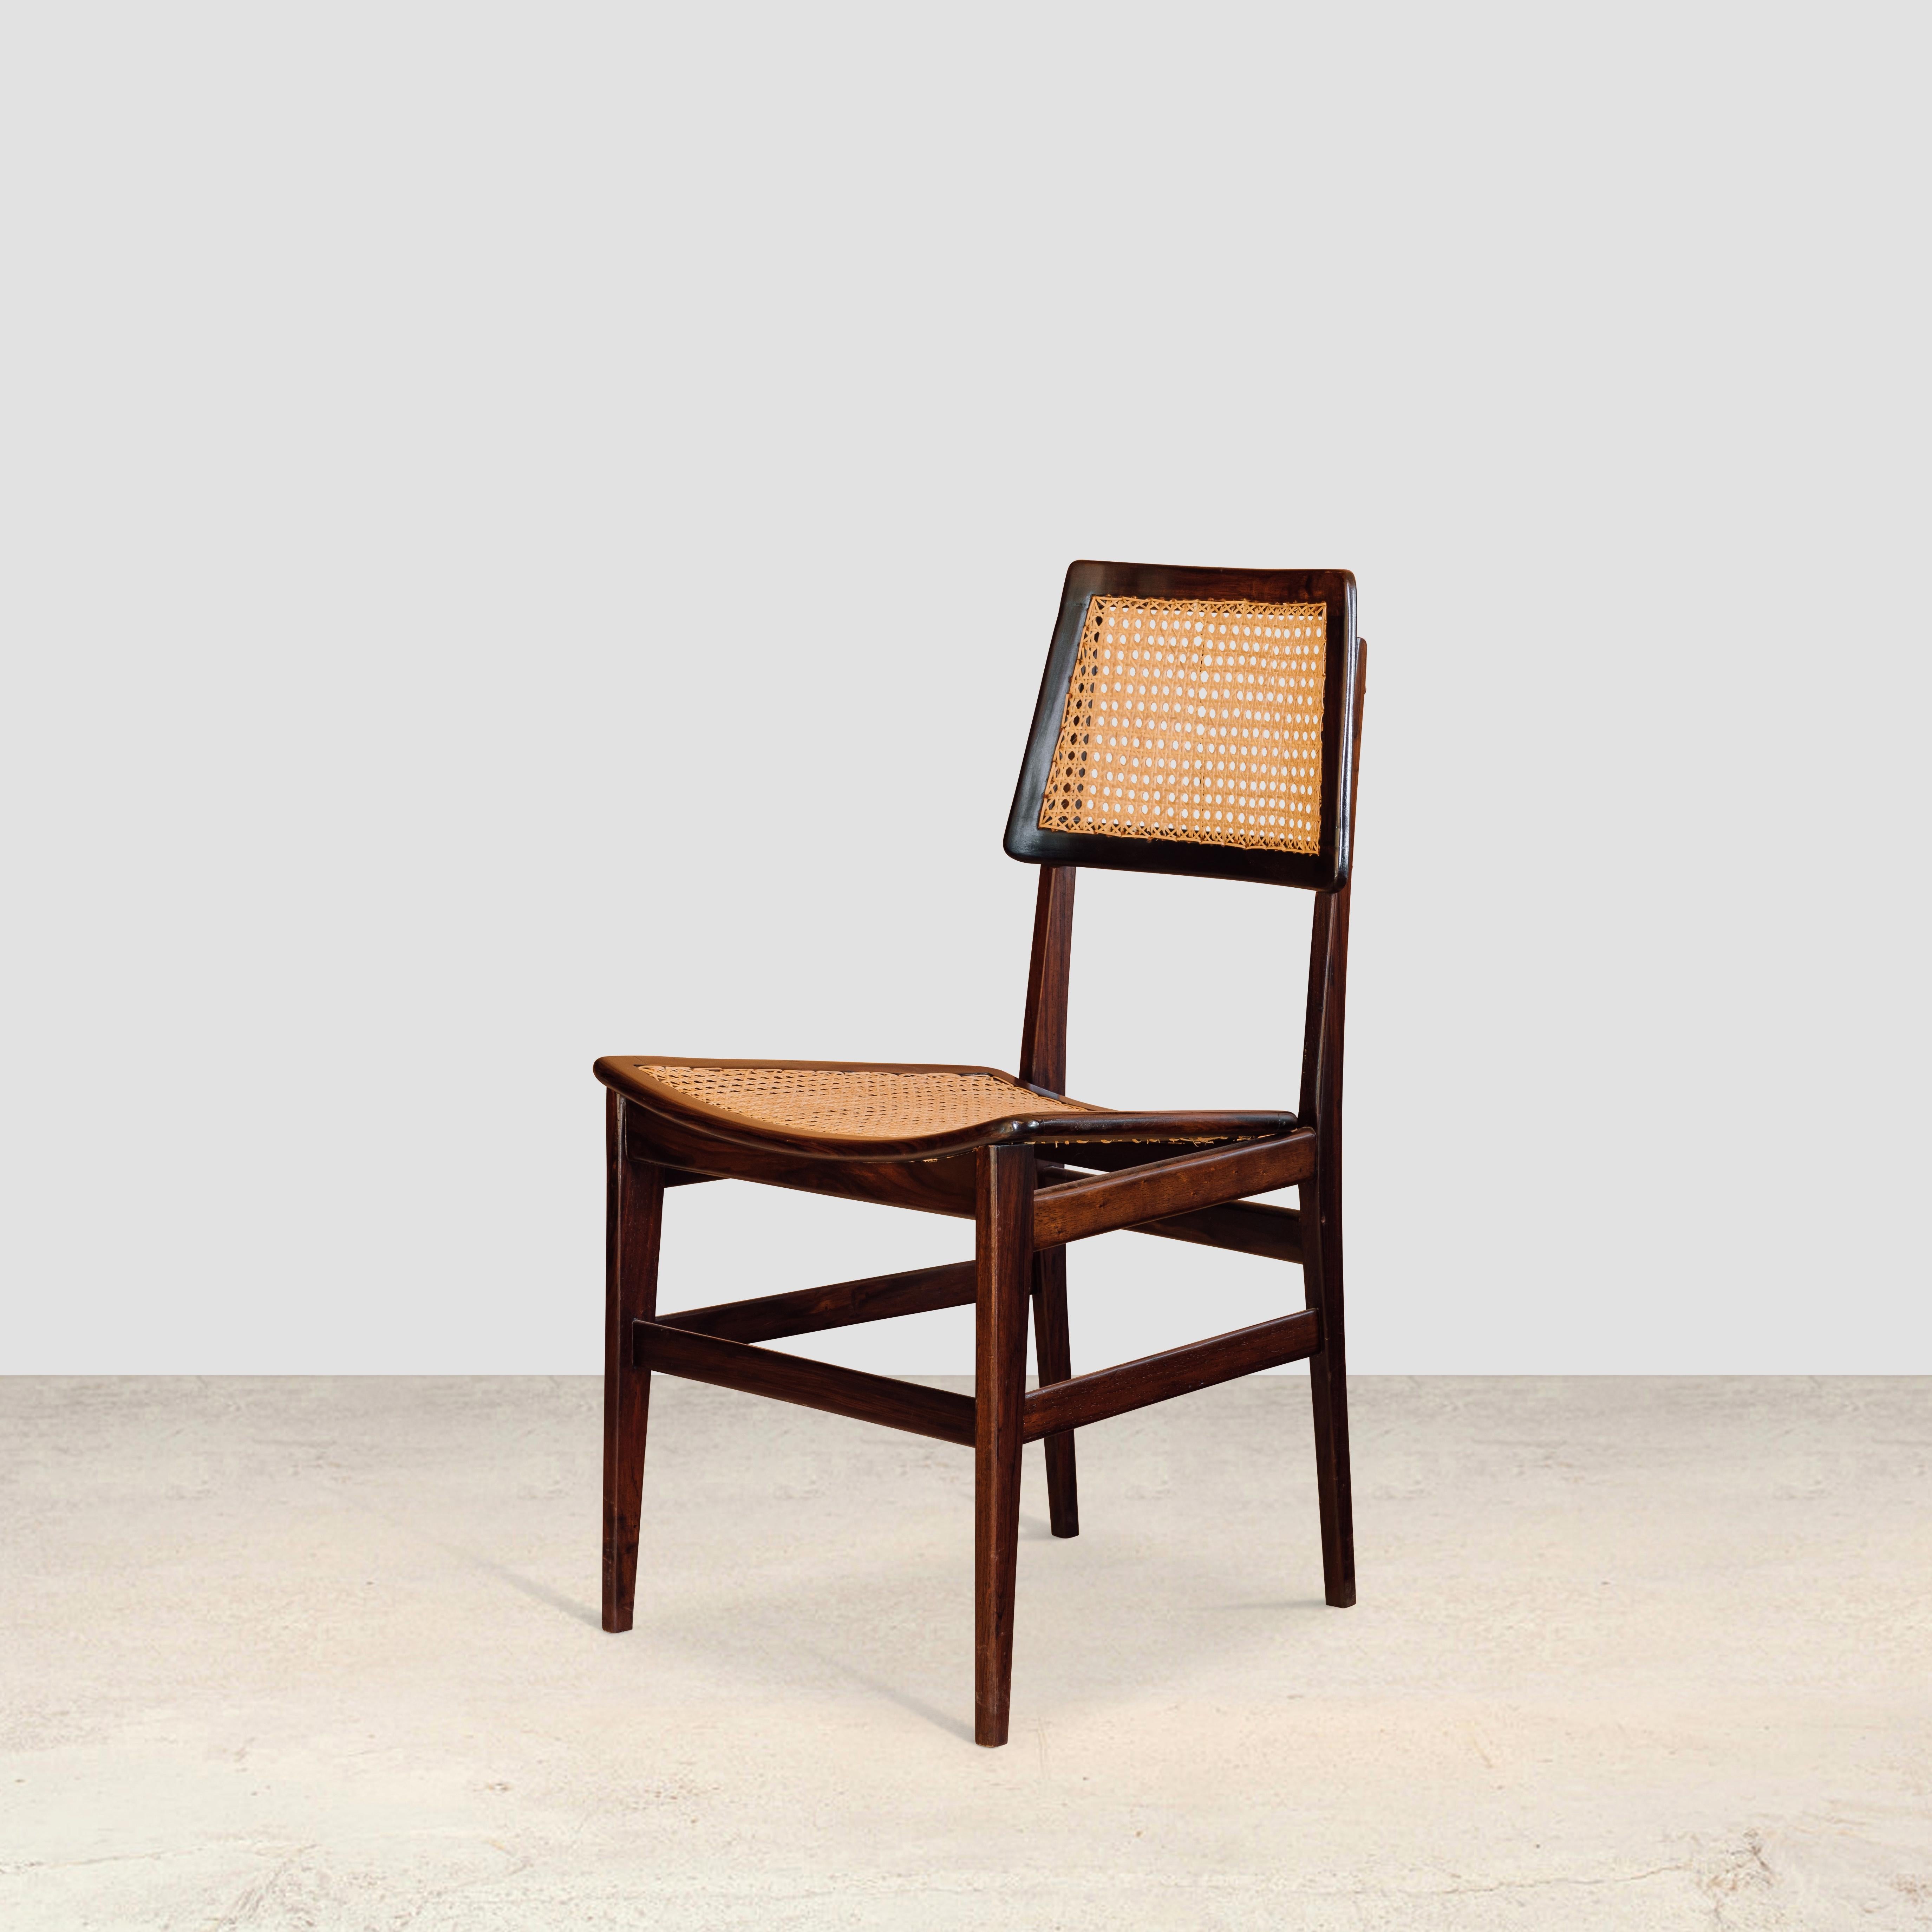 Set of 4 cane and rosewood side chairs
By Joaquim Tenreiro 1960

Tenreiro championed furniture that was “formally light”, as he described; working in wicker and tropical hardwoods to suit the hot climate of Brazil, he is a prime example of a